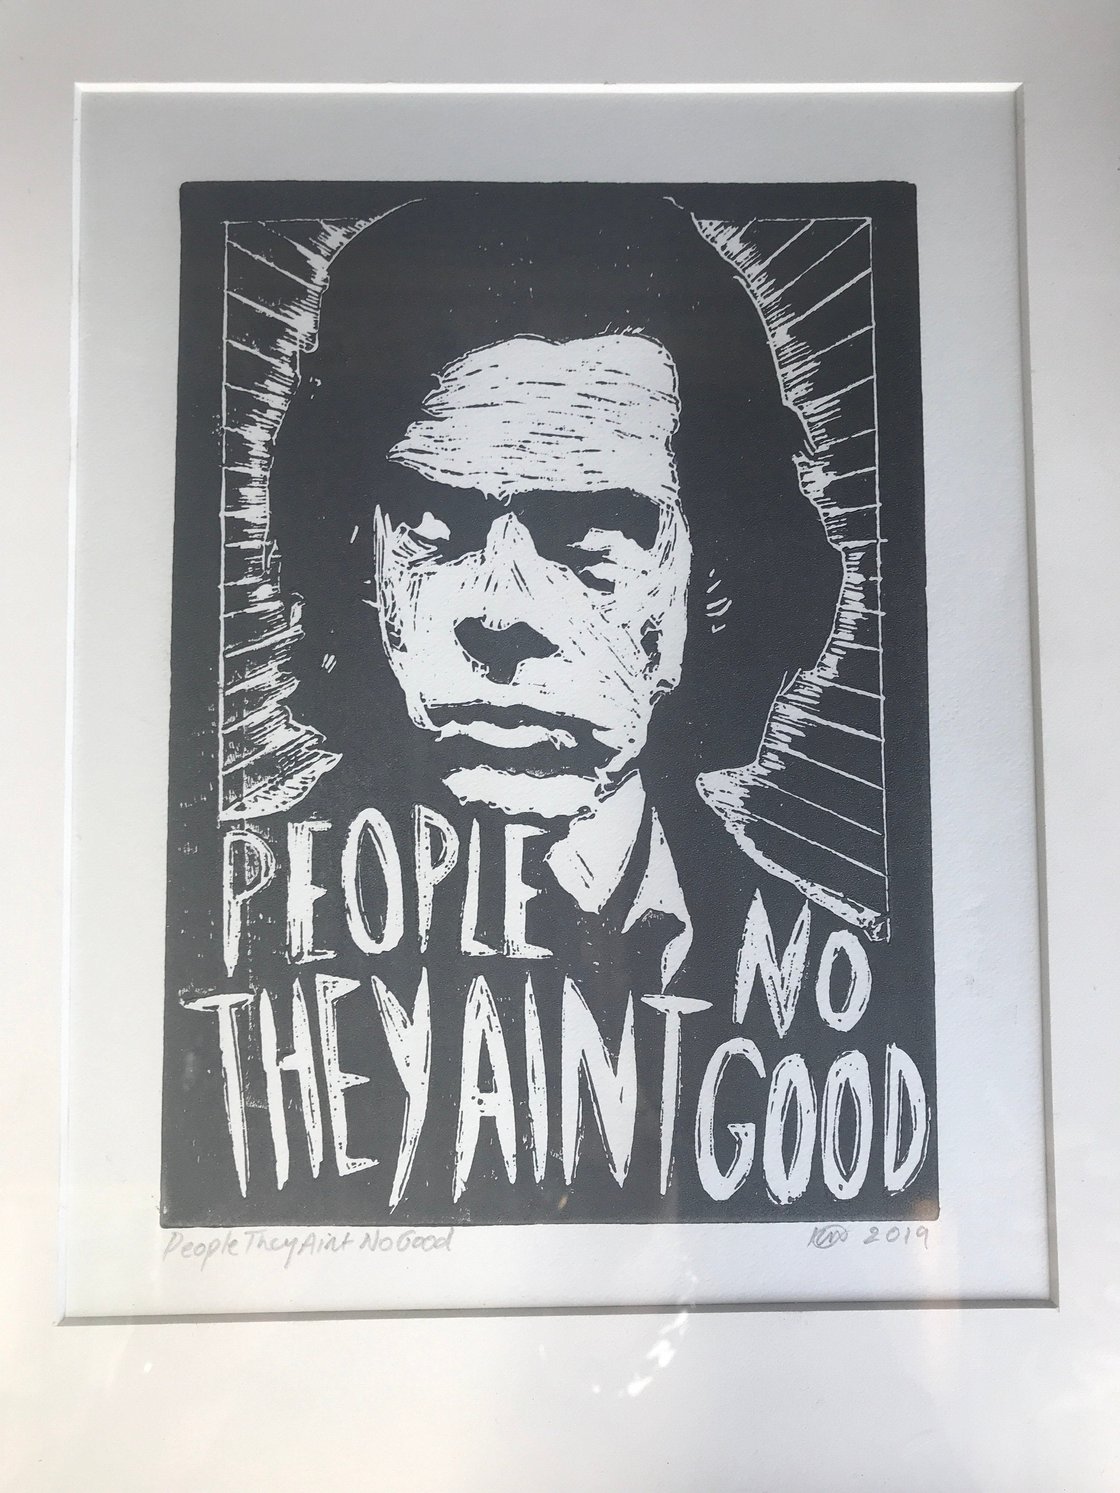 Image of Nick Cave. Hand Made. Original A4 linocut print. Limited and Signed. Art.